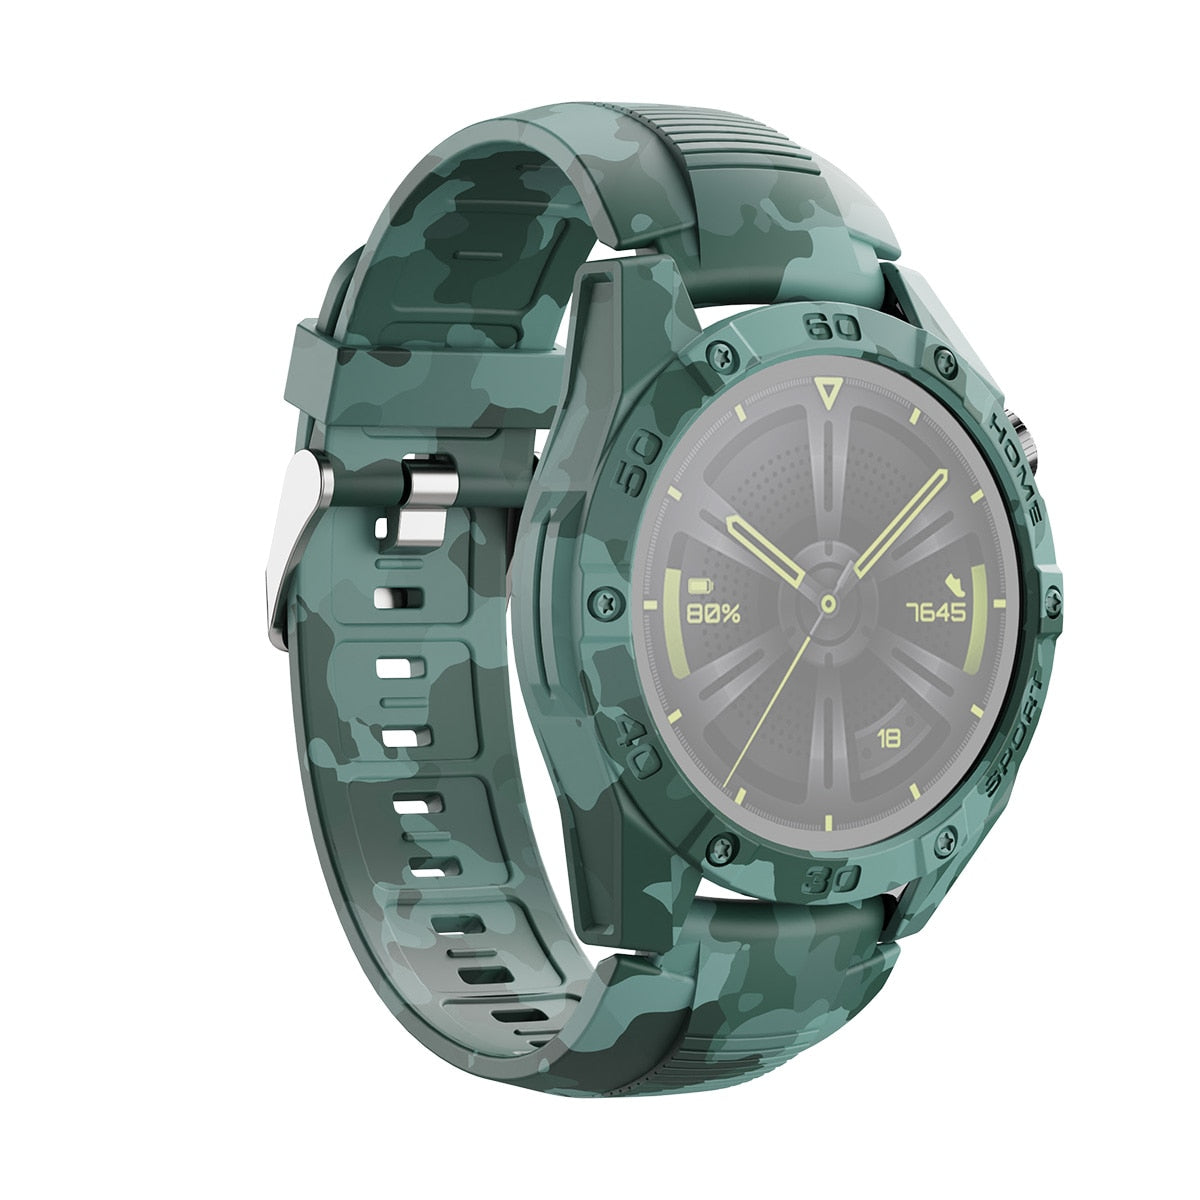 SIKAI for Huawei Watch GT3 46mm - Protective Case and Replacement Band Set in Camouflage Desig SIKAI CASE